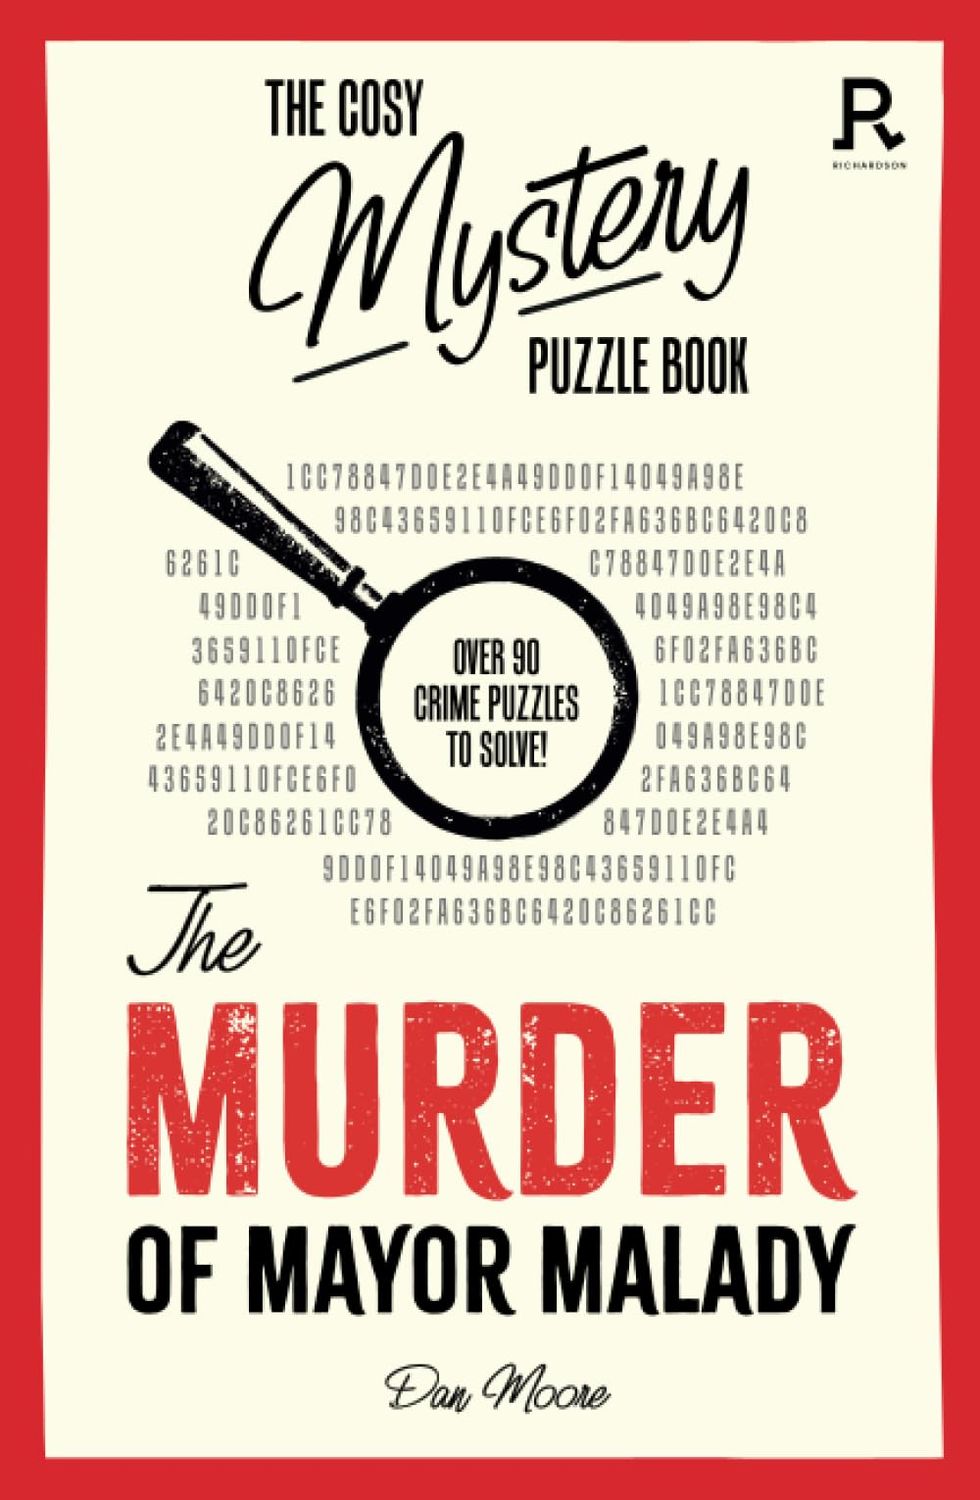 The Cosy Mystery Puzzle Book - The Murder of Mayor Malady: Over 90 crime puzzles to solve! (Cosy Mystery Puzzle Books)